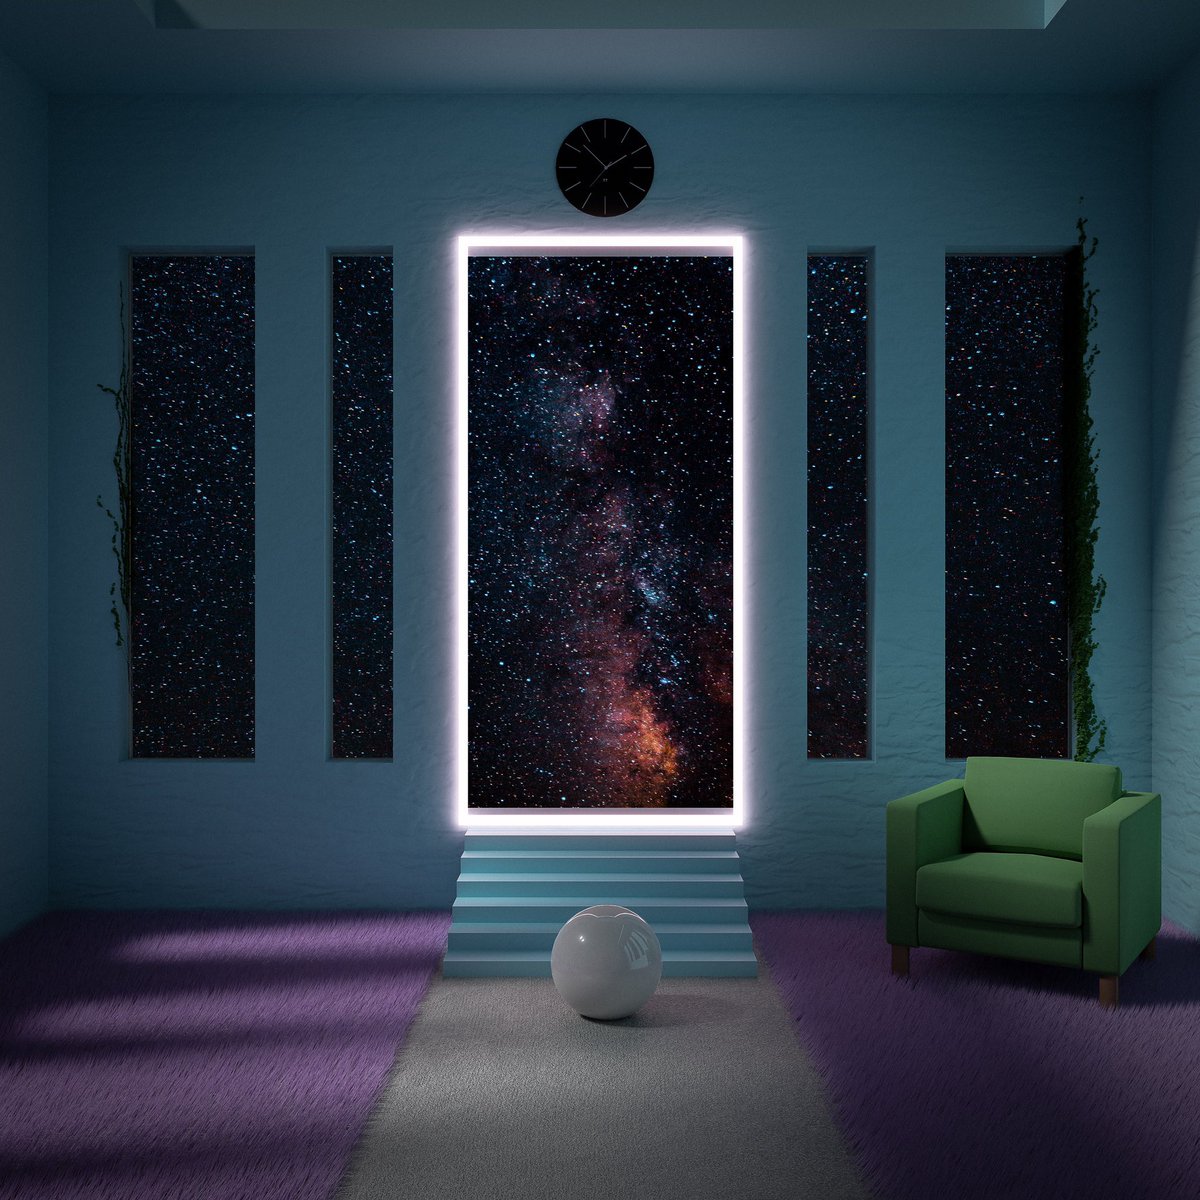 Starry photo frame background with a white ball in a room